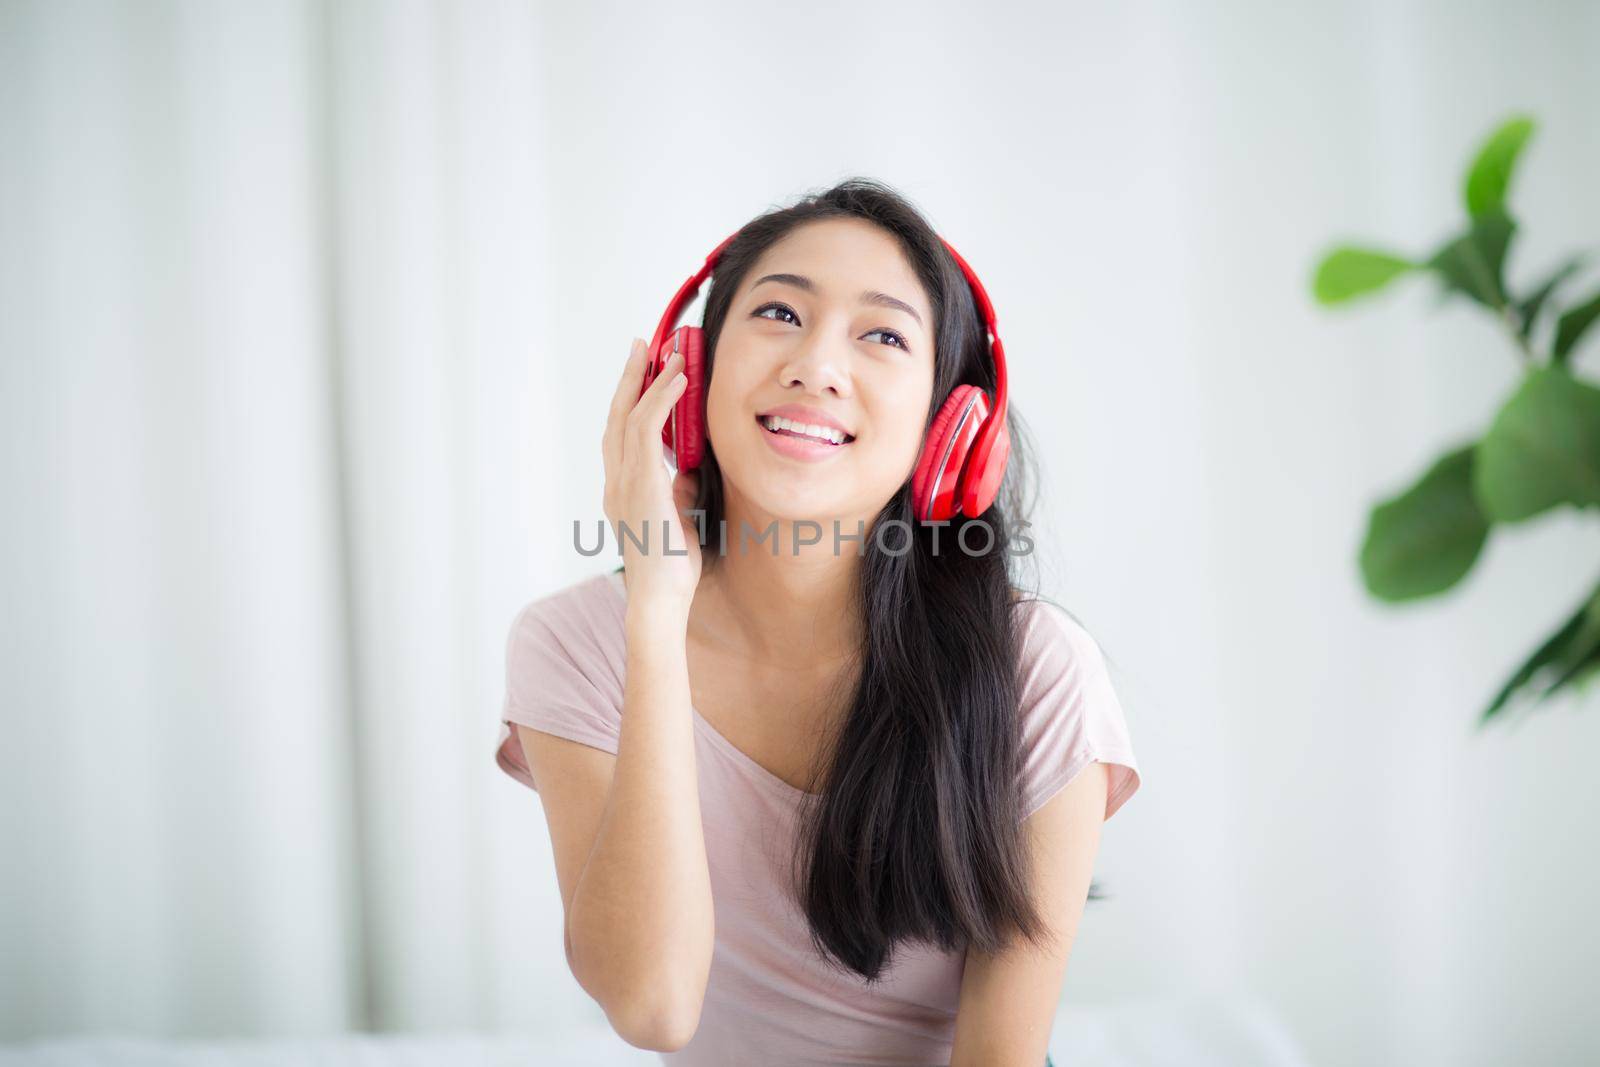 Beautiful women smile happily and relax while listening to music with headphones.